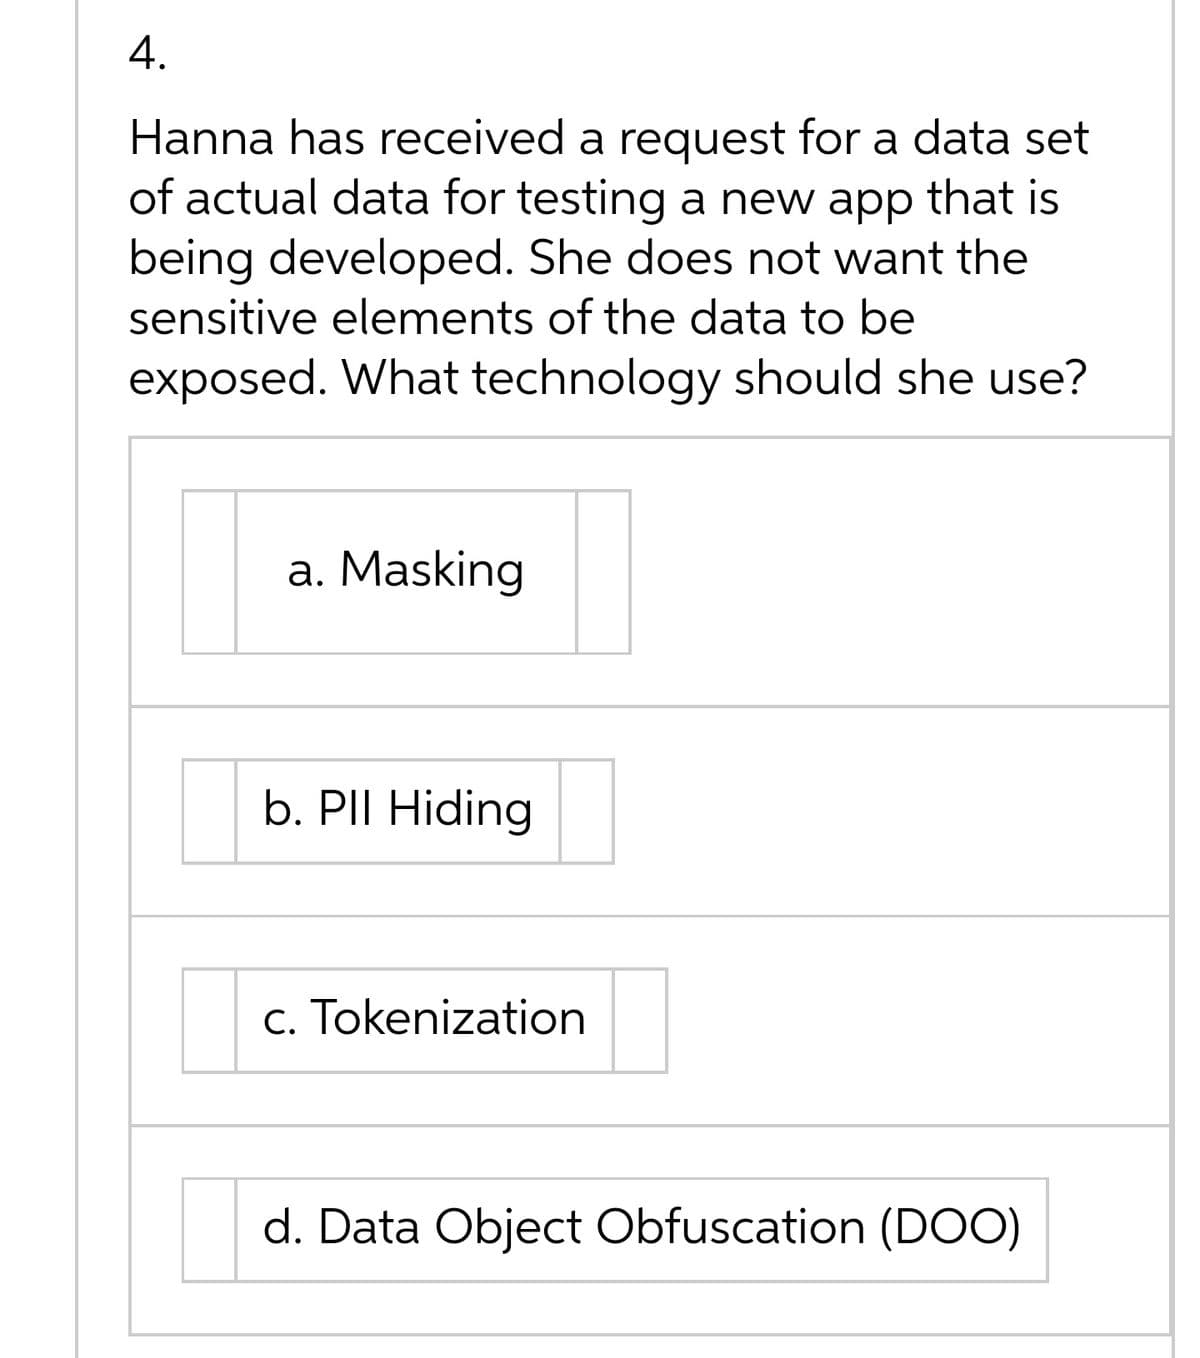 4.
Hanna has received a request for a data set
of actual data for testing a new app that is
being developed. She does not want the
sensitive elements of the data to be
exposed. What technology should she use?
a. Masking
b. PII Hiding
c. Tokenization
d. Data Object Obfuscation (DOO)
